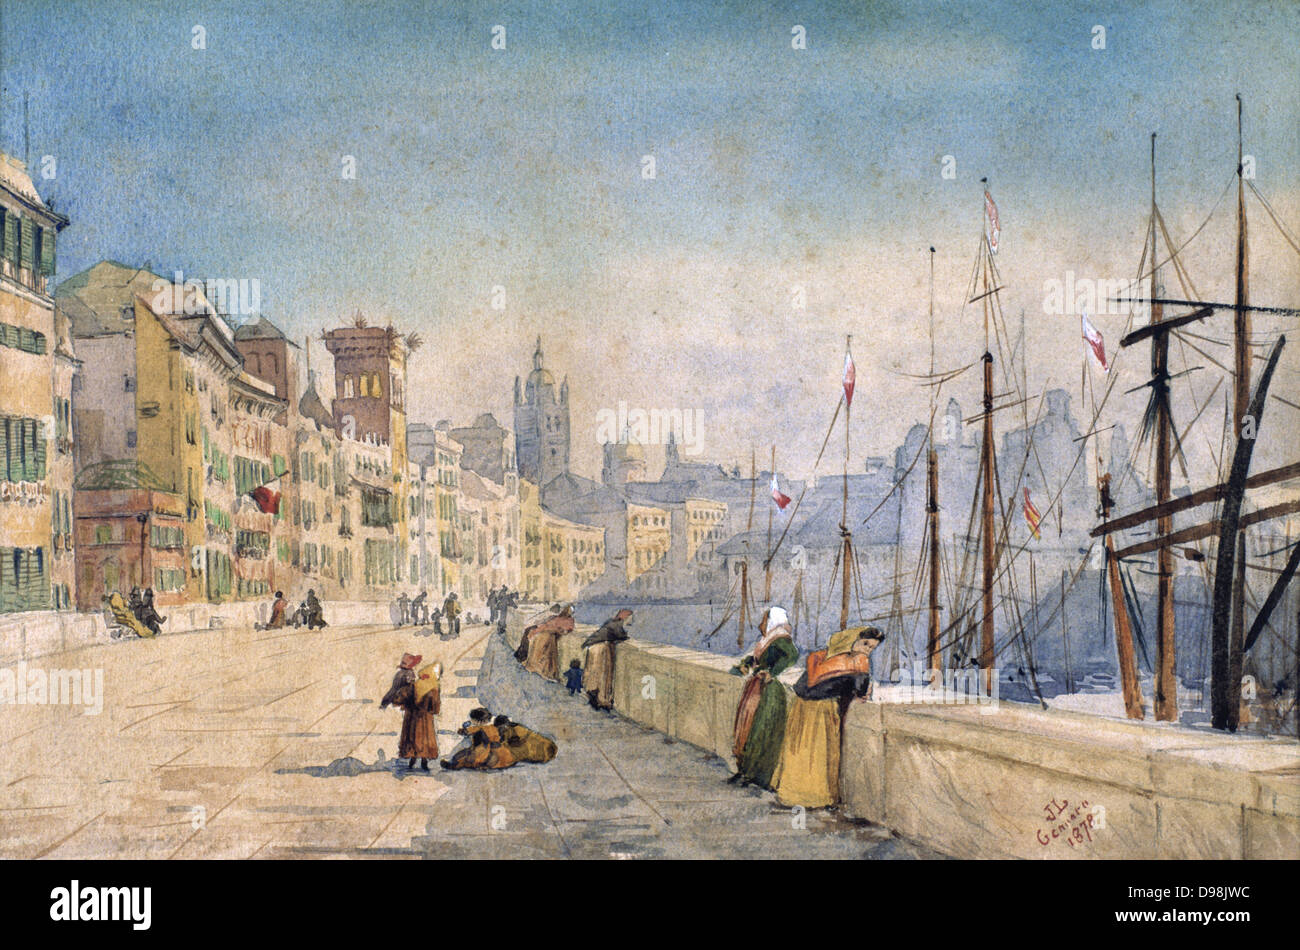 The Port of Genes' (Genoa), 1878. Watercolour by J.L Genatto. Sunlit buildings at quayside, women leaning on sea wall by masts of vessels docked vessels. Stock Photo